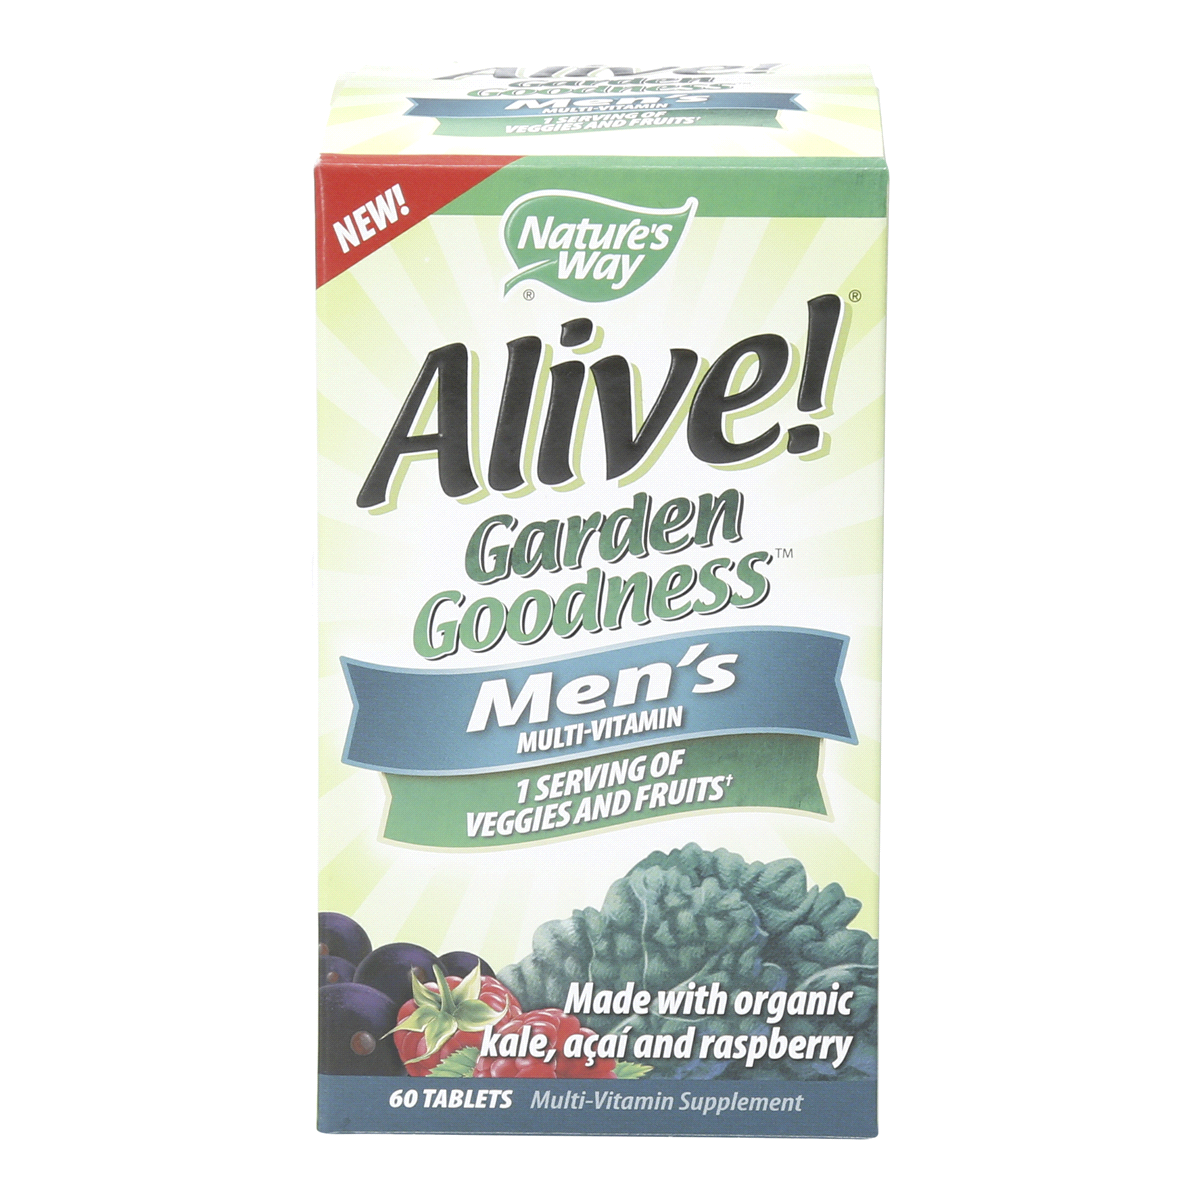 slide 1 of 1, Nature's Way Alive! Garden Goodness Men's Multivitamin, One Serving of Veggies and Fruits**, High Potency B-Vitamins, 60 Tablets, 60 cnt